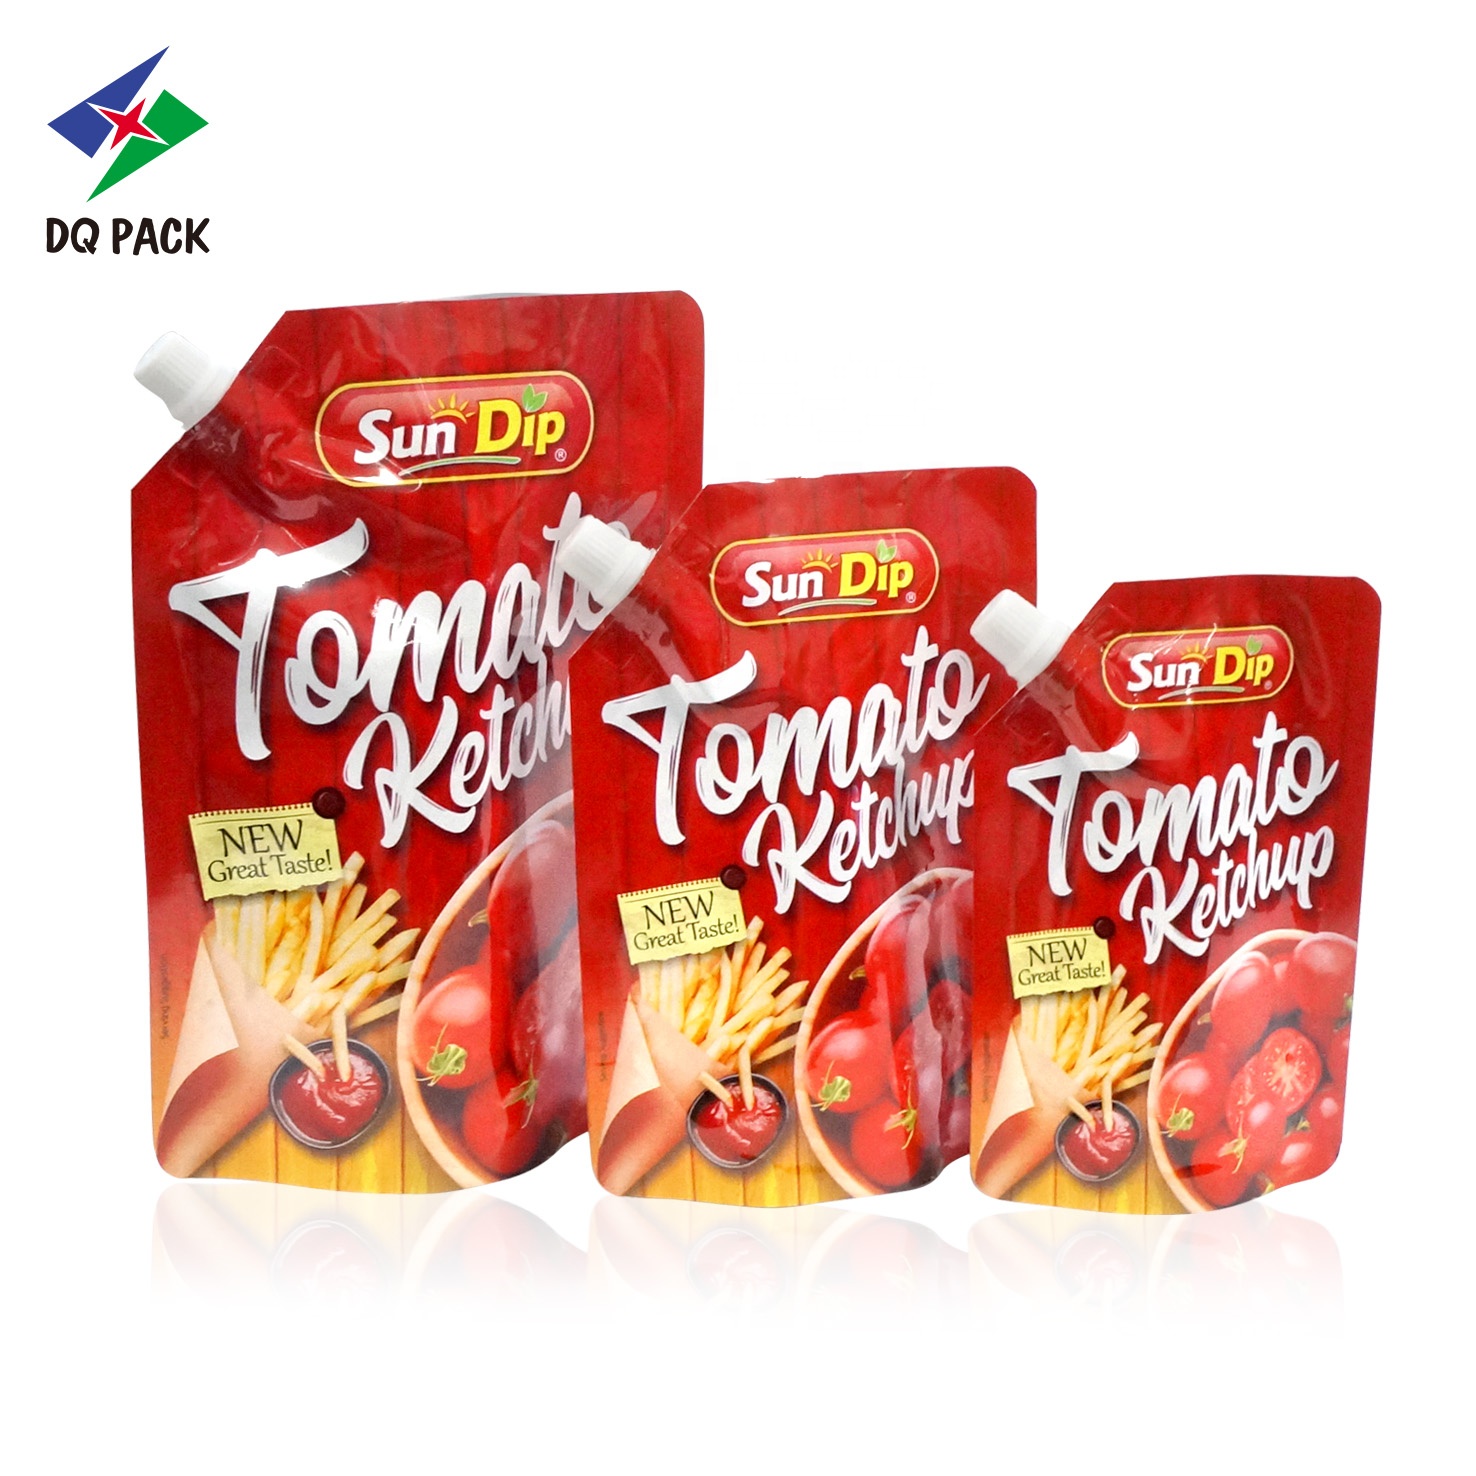 DQ PACK High Quality 500g Tomato Paste Stand Up Pouch Plastic Packaging Bag with Spout